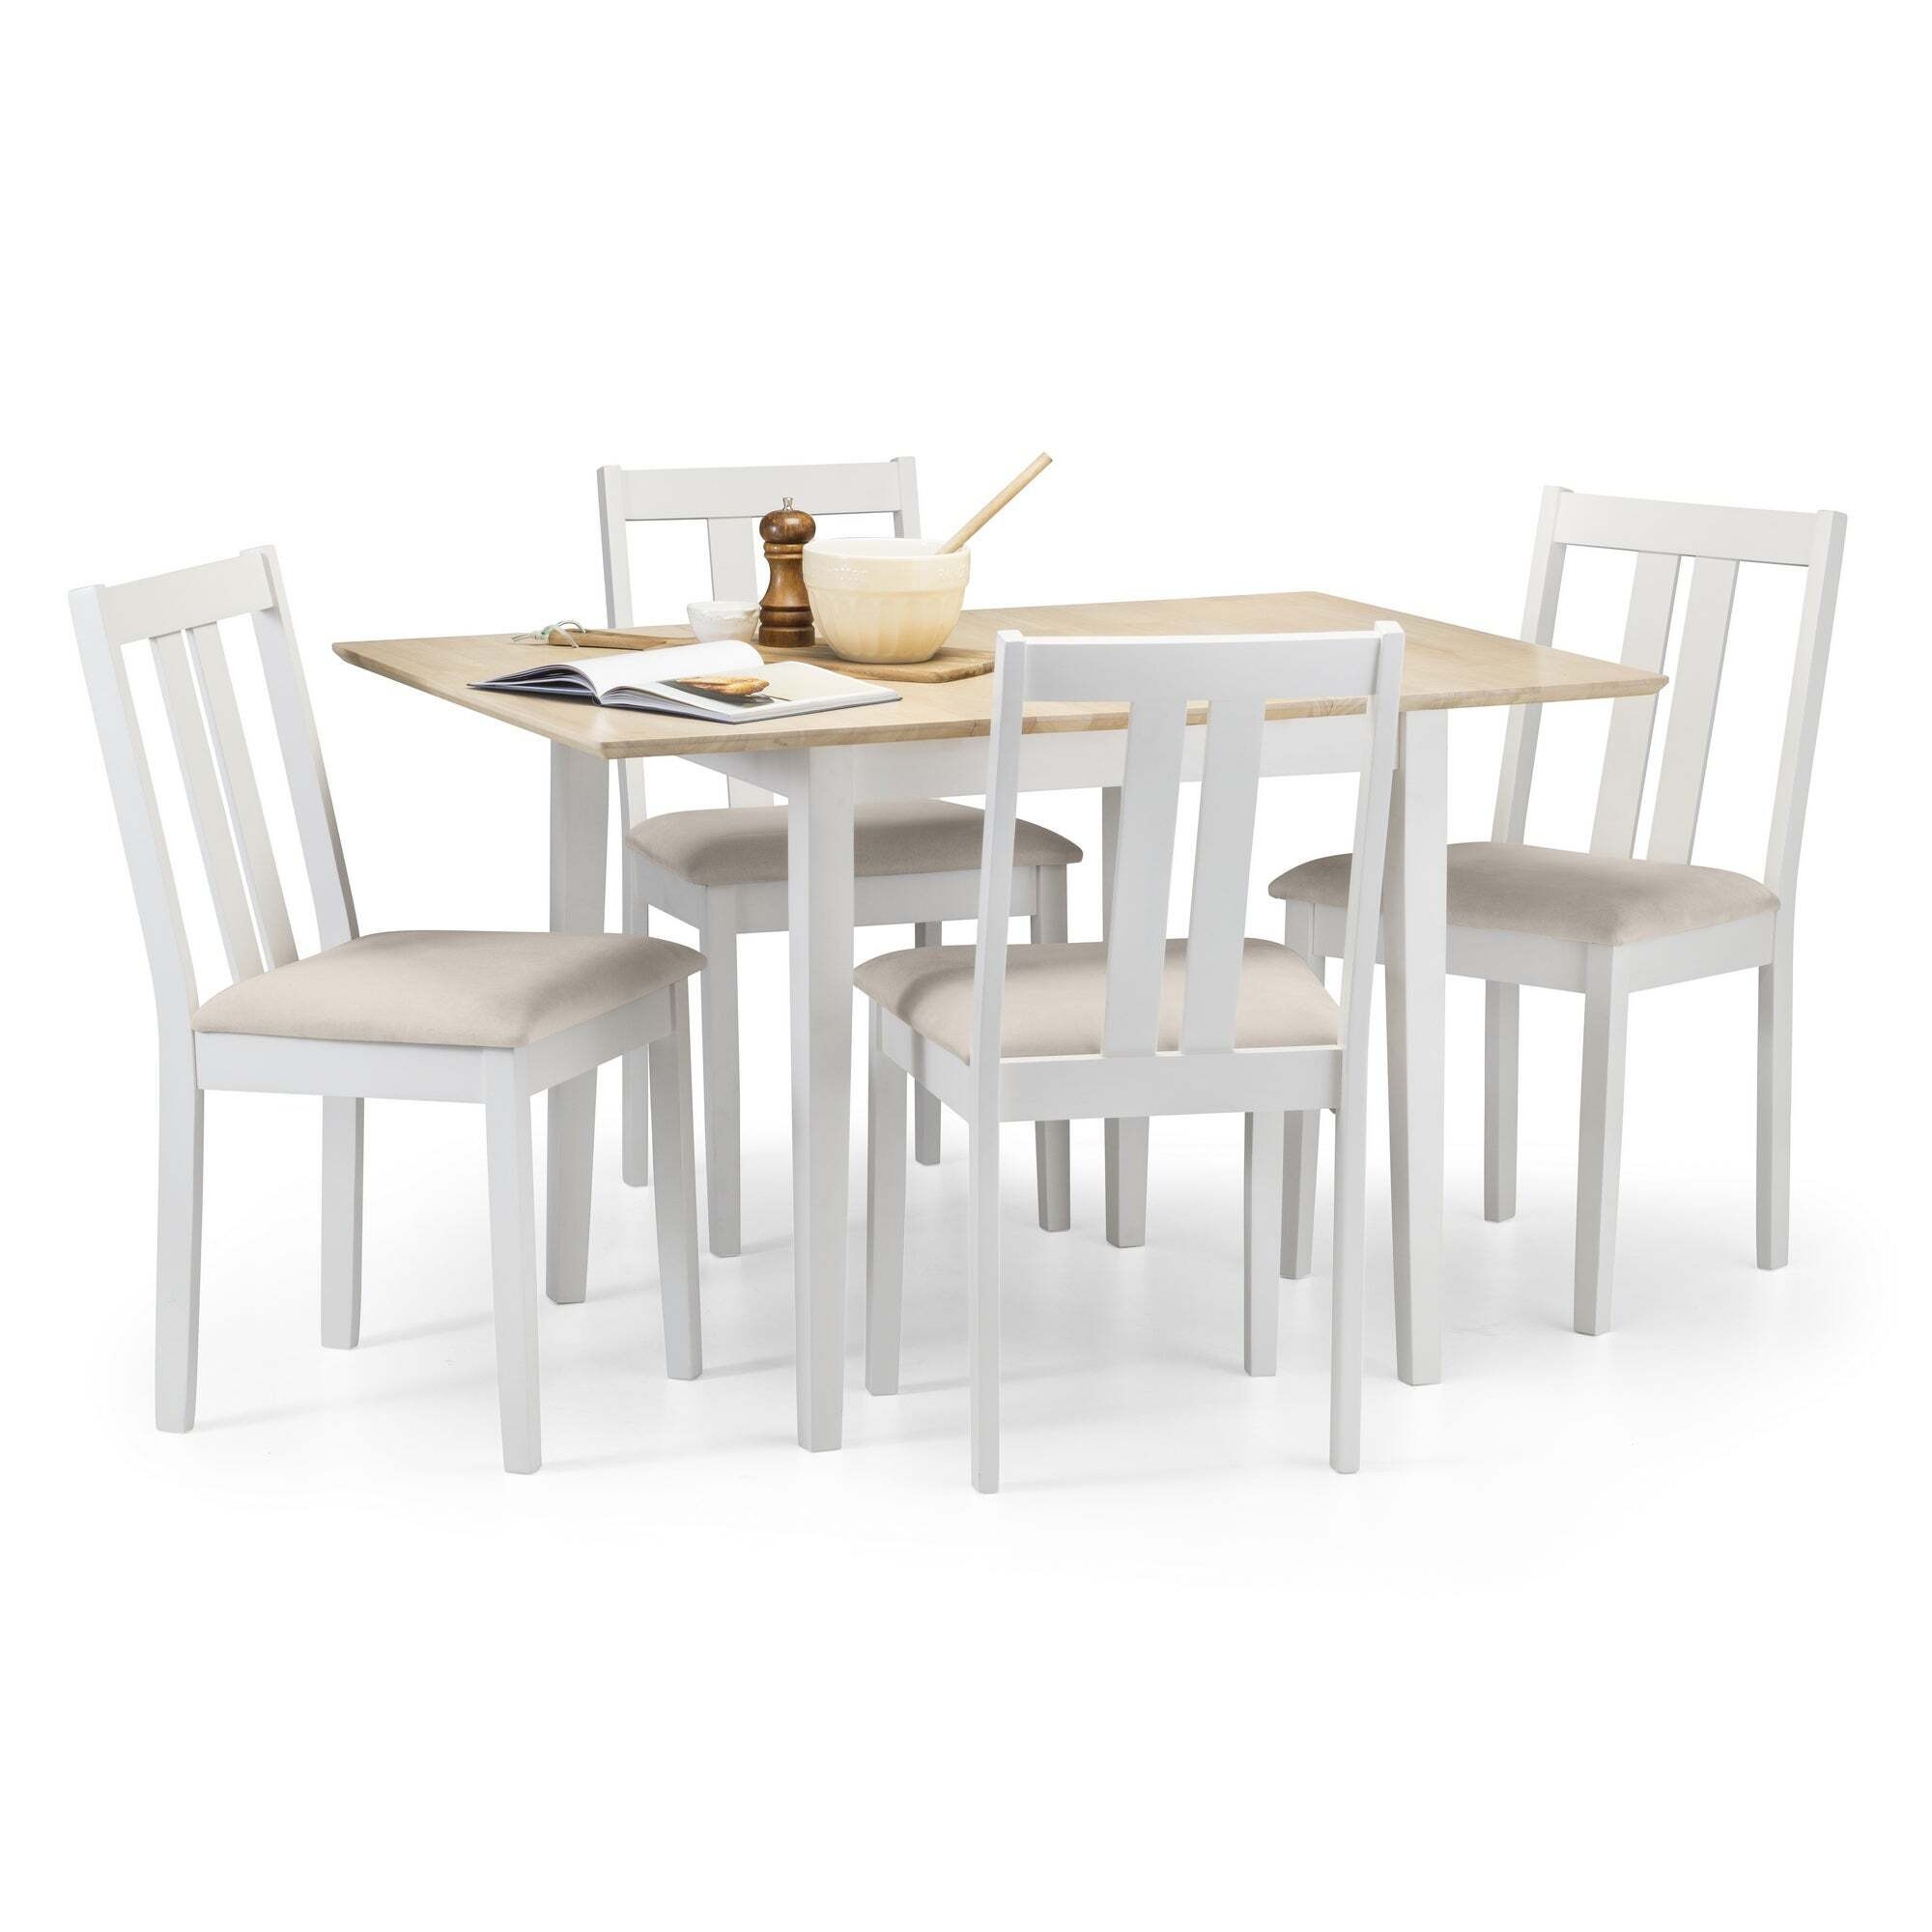 Rufford Square Extendable Dining Table with 4 Coast Chairs Cream